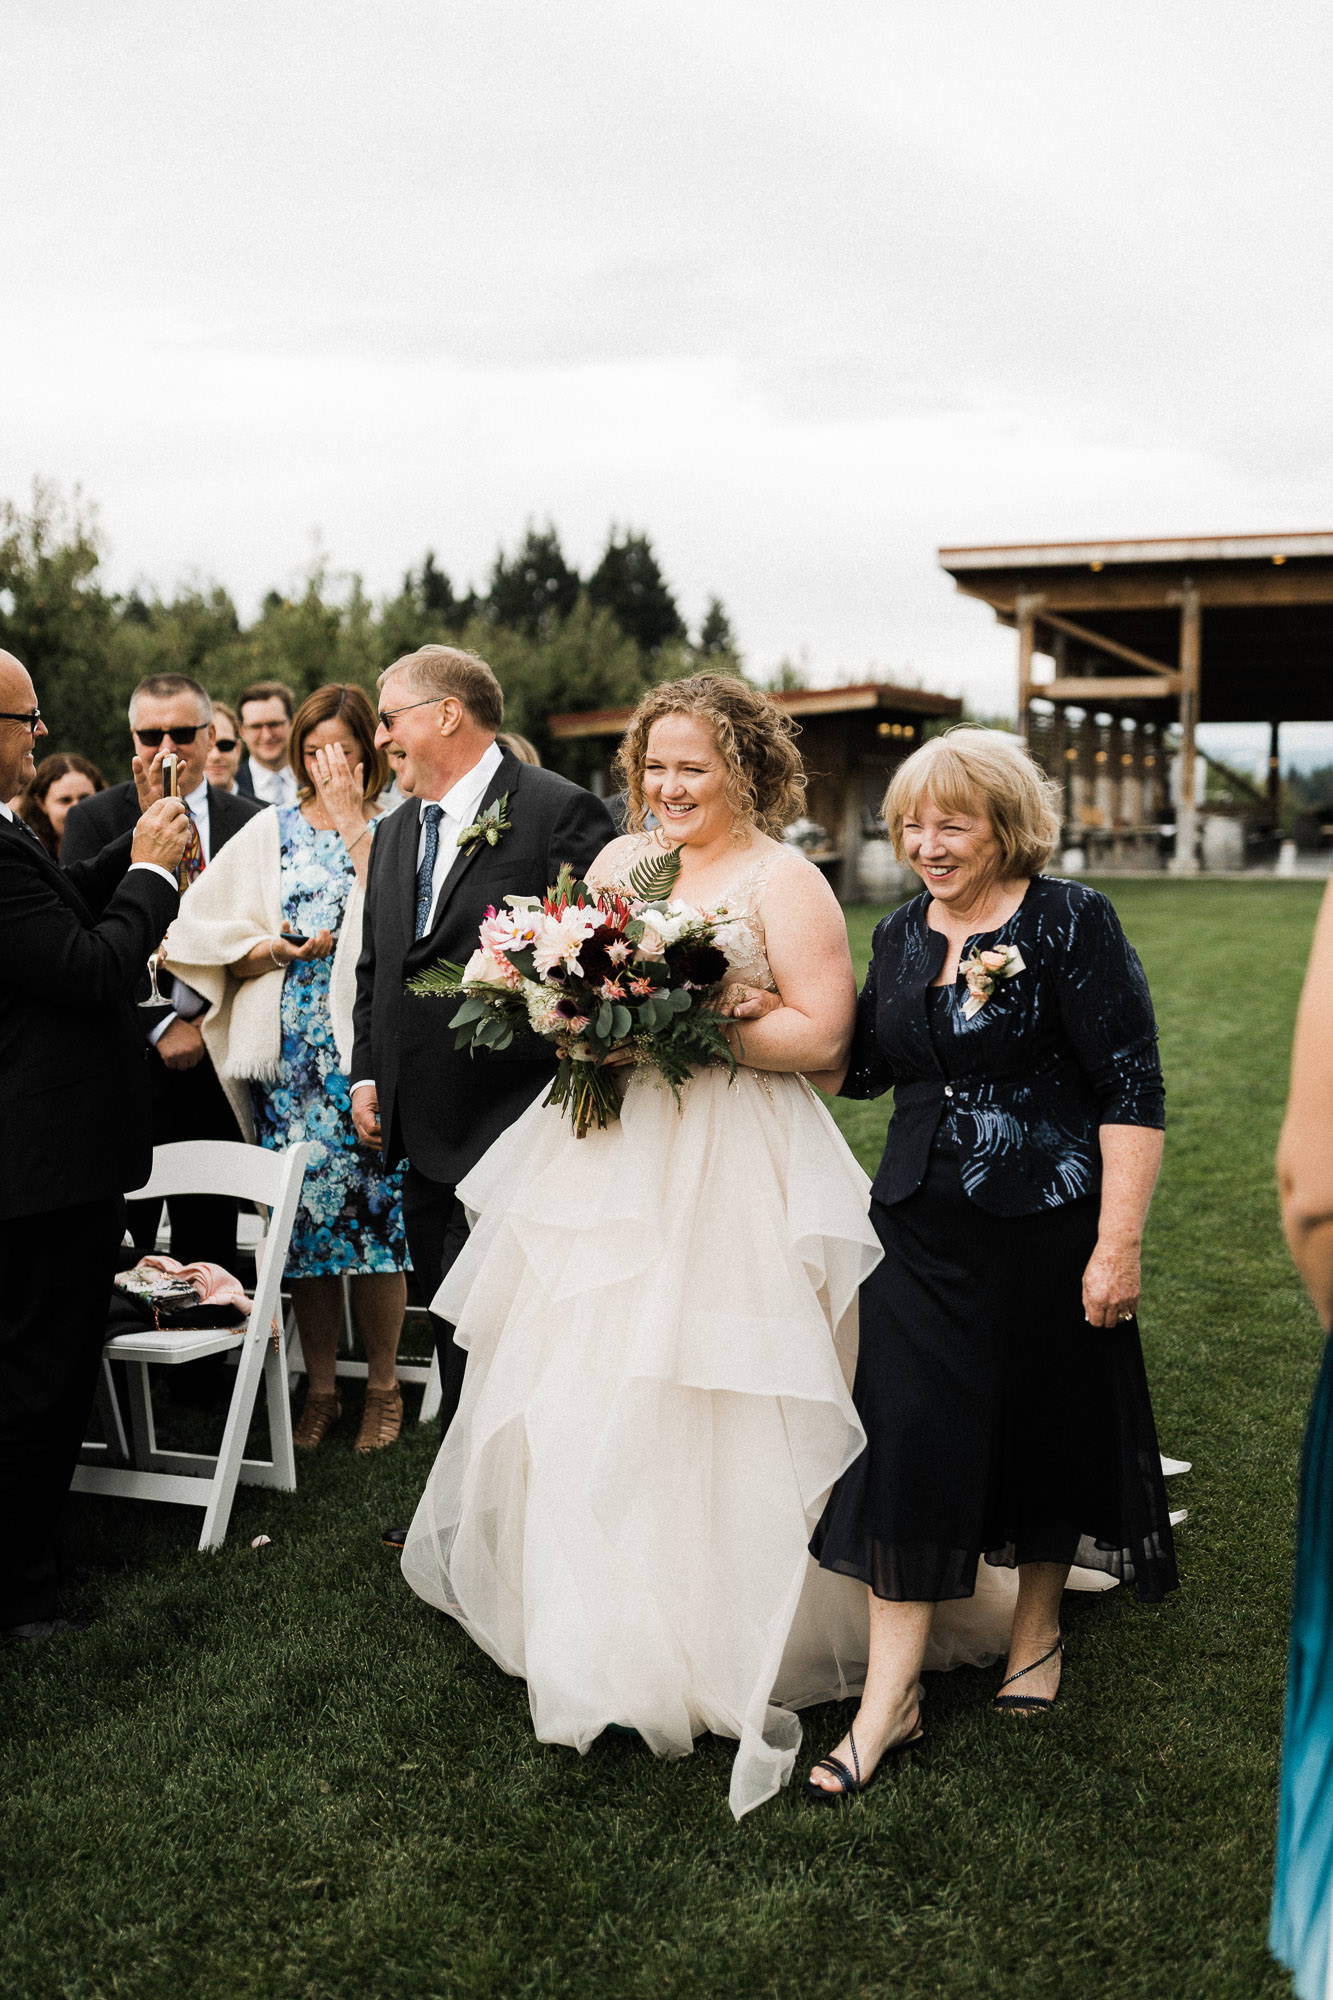 The bride's parents walk her down the aisle at Mt. View Orchards in Mt Hood, Oregon.